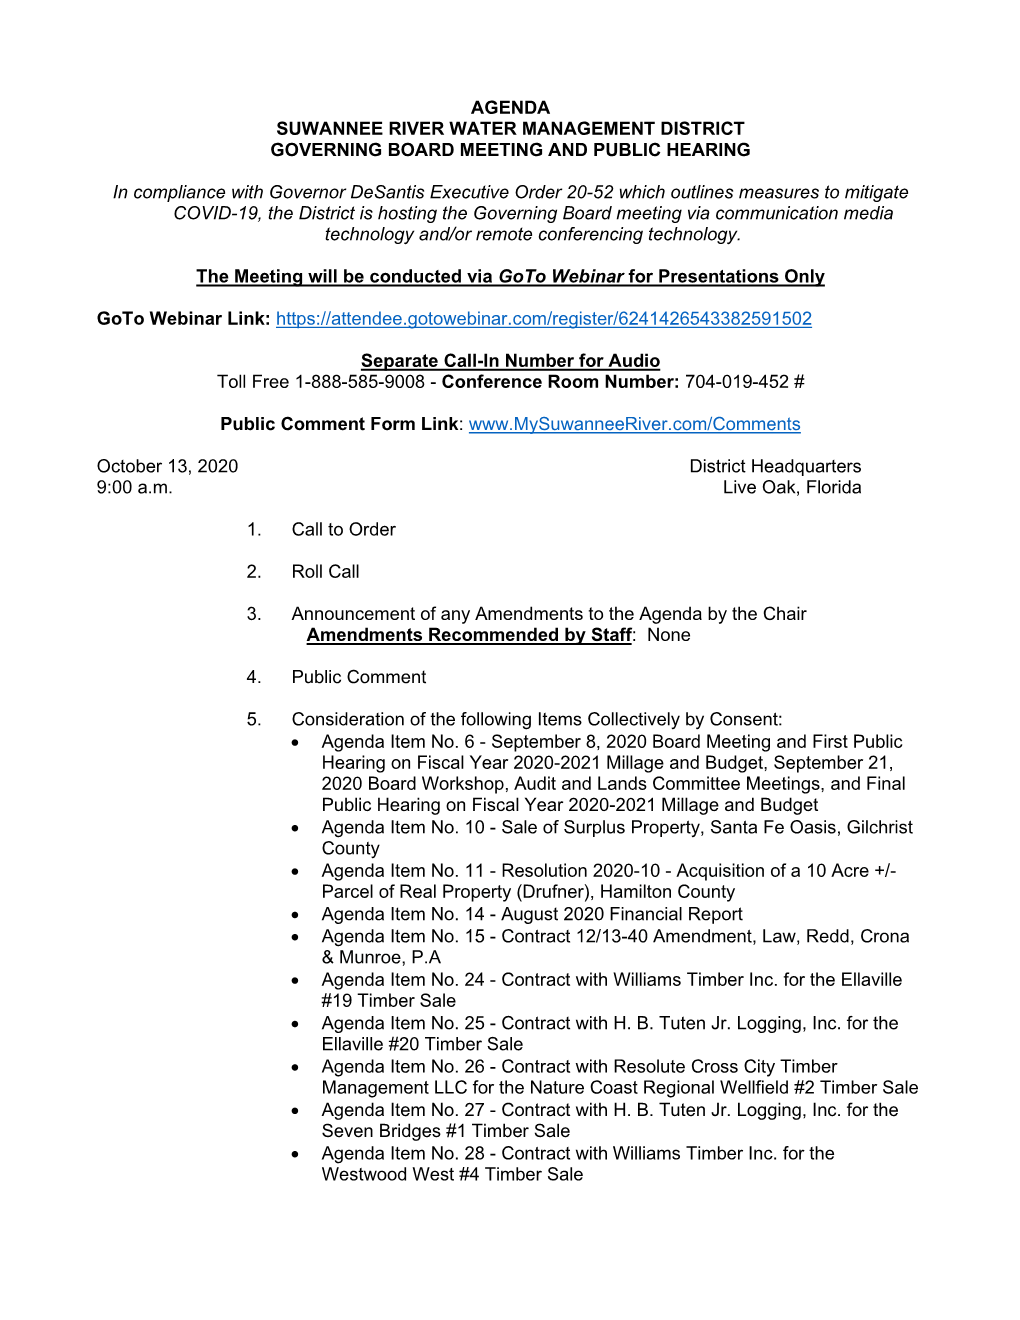 AGENDA SUWANNEE RIVER WATER MANAGEMENT DISTRICT GOVERNING BOARD MEETING and PUBLIC HEARING in Compliance with Governor Desantis